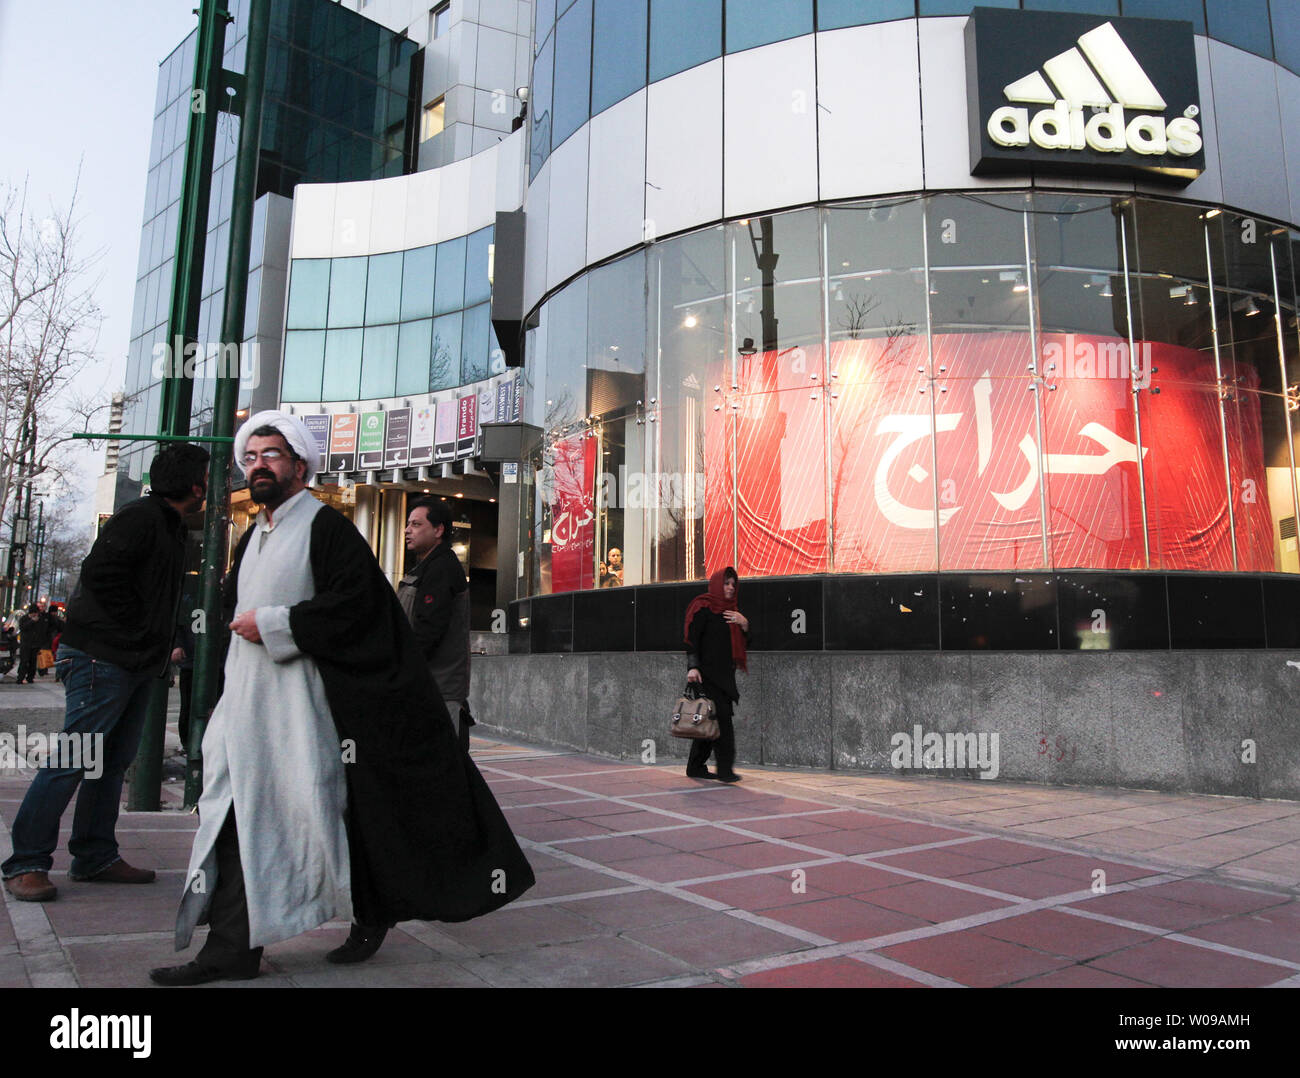 Kreek Kleuterschool Ringlet An Iranian clergyman walks next to the Adidas store in Tehran, Iran on  February 26, 2012. Campaigning for Iran's parliamentary election officially  started on February 23, 2012 and closes on March 1,